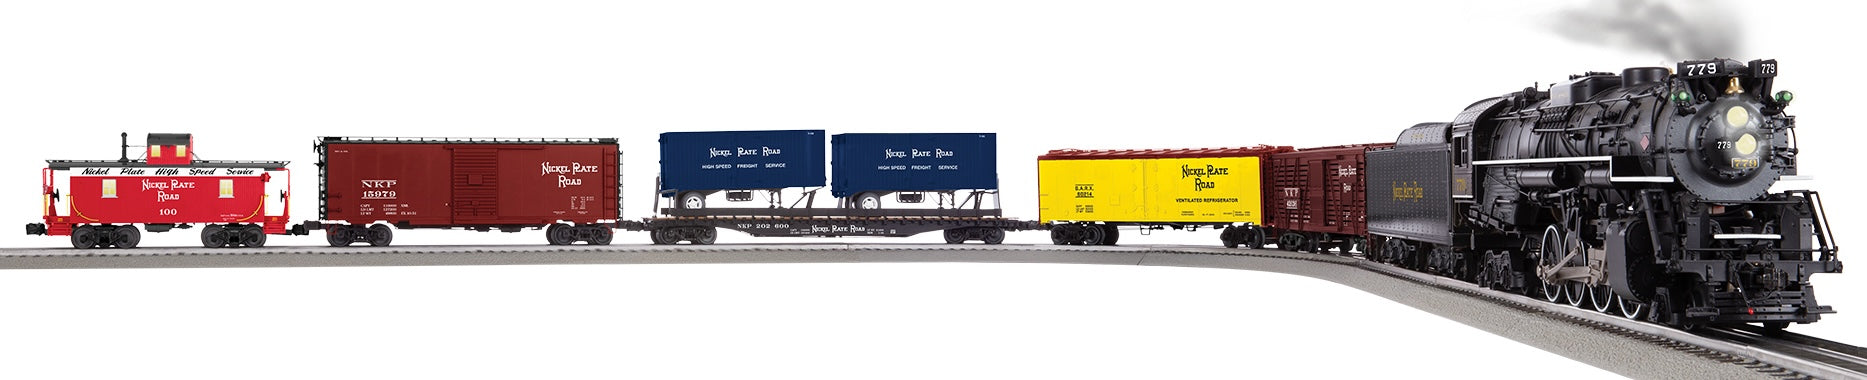 Lionel 2422050 - Legacy "Nickel Plate Road" Fast Freight Set